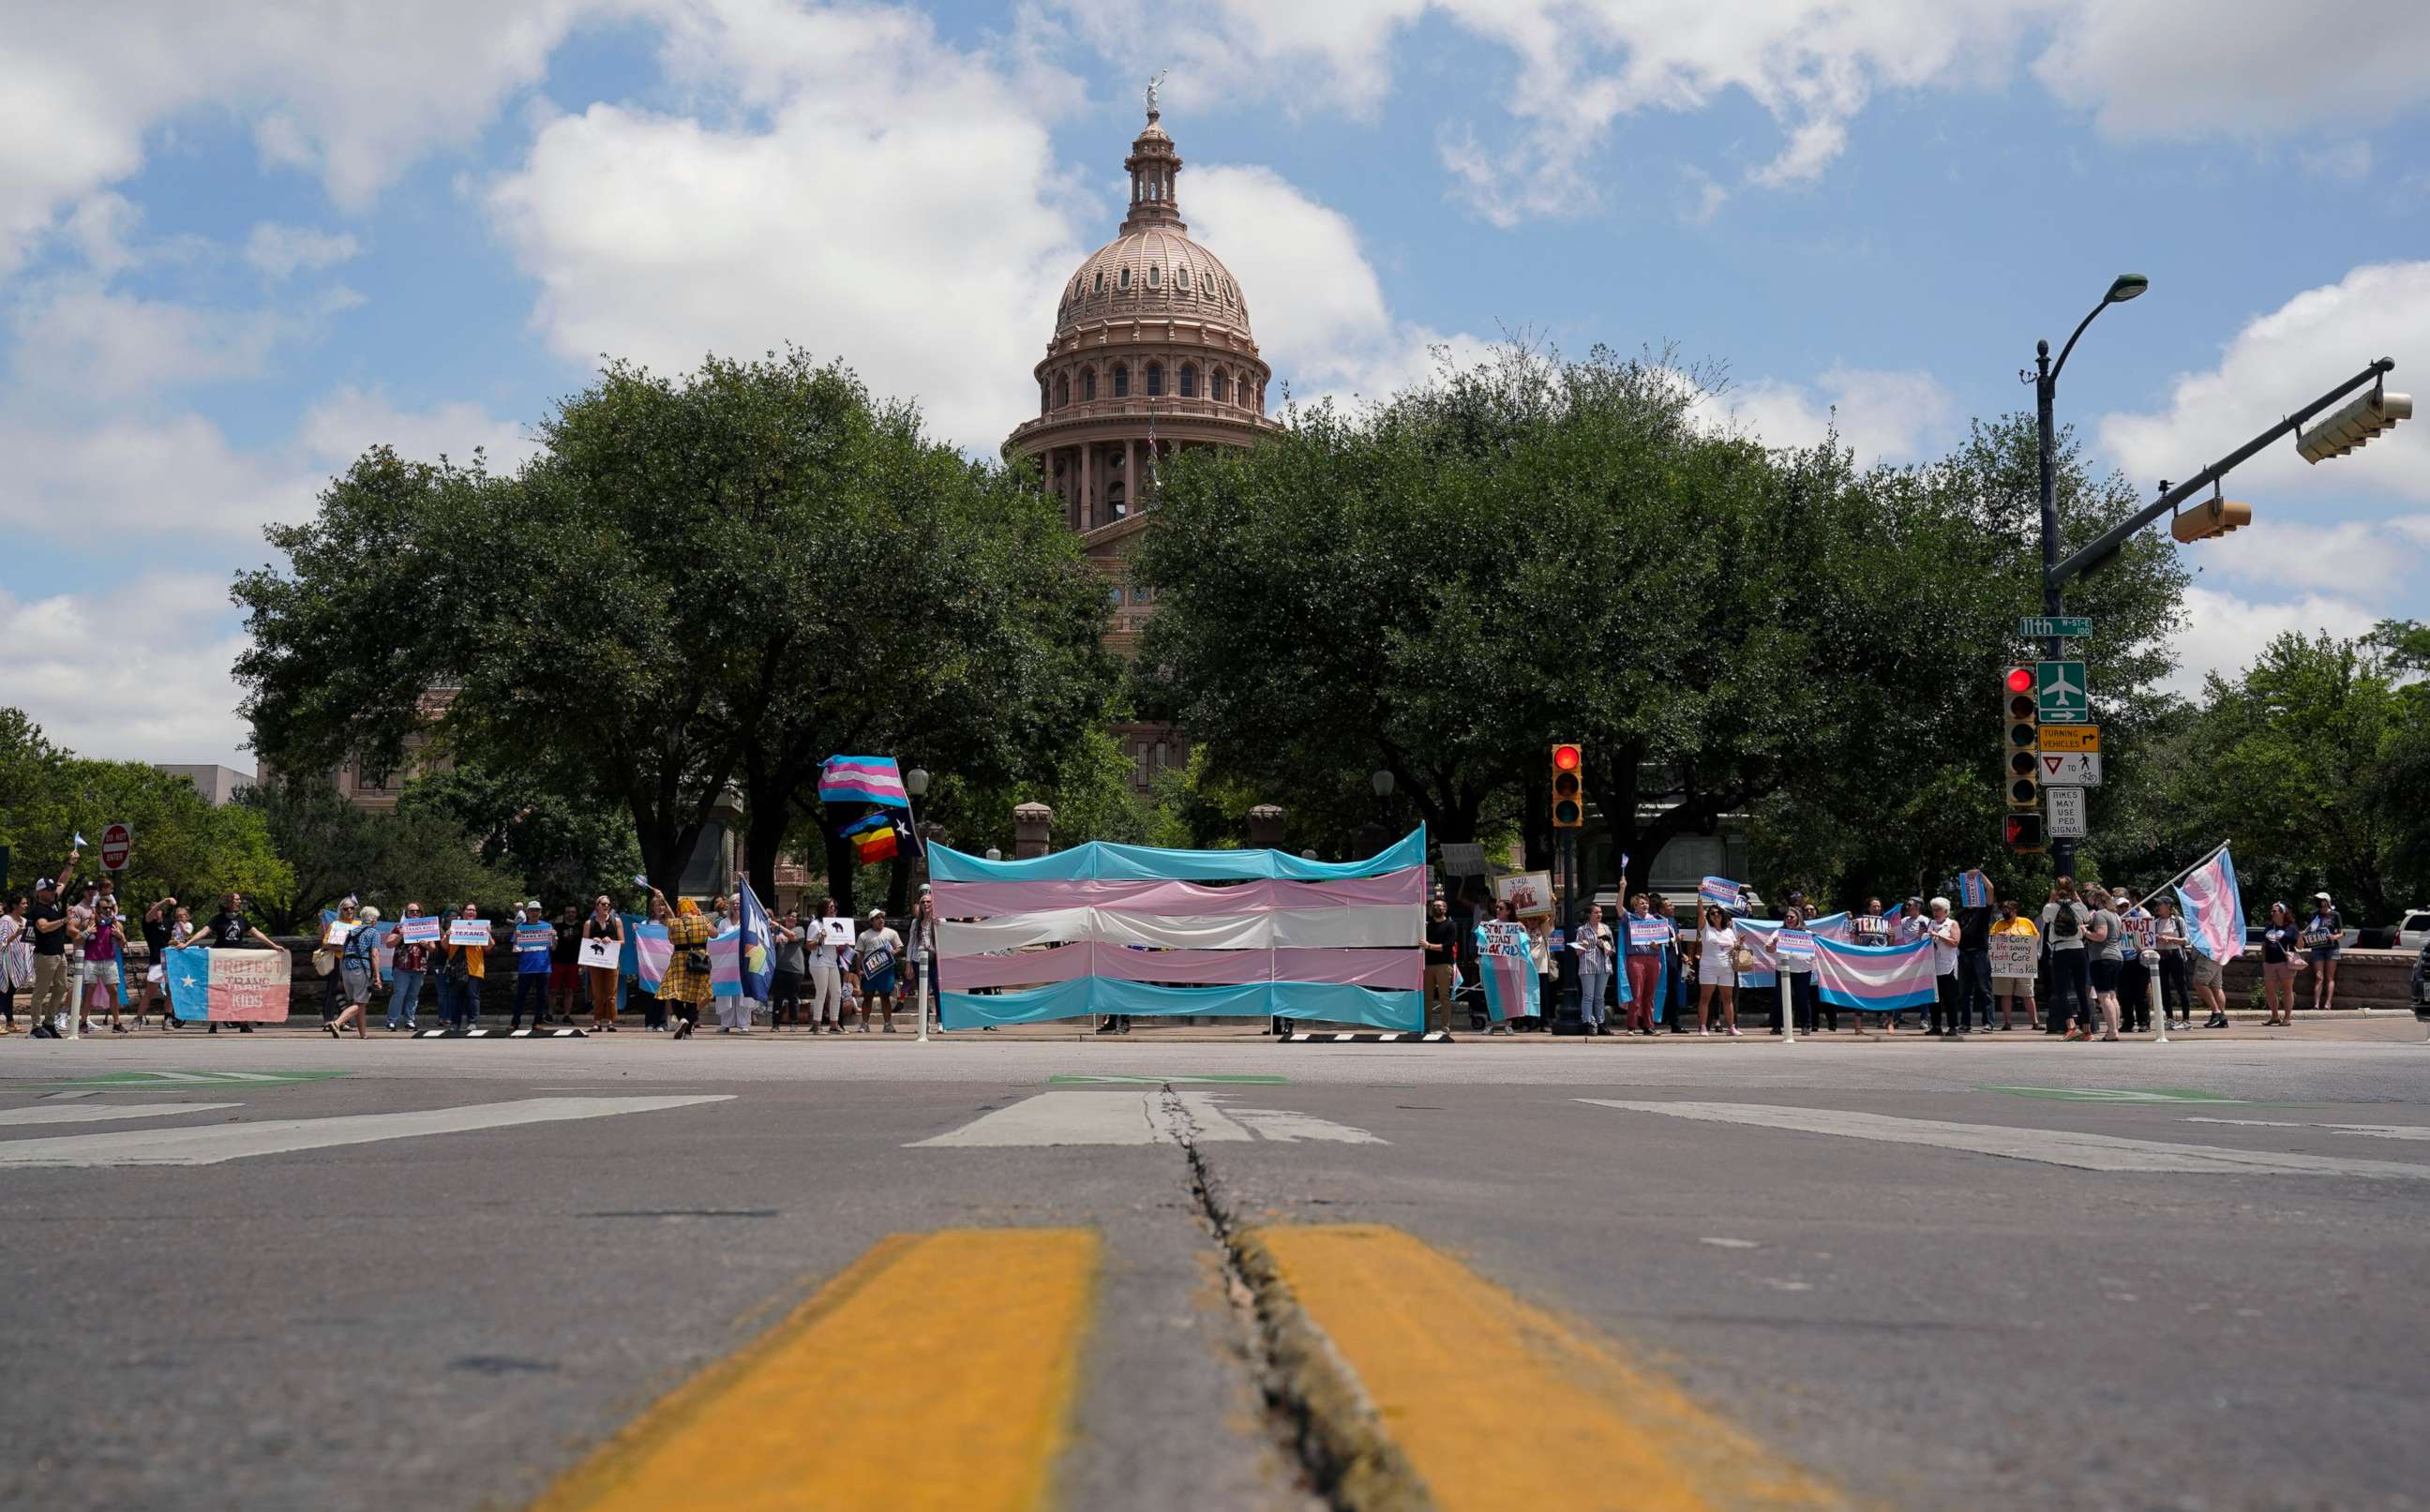 PHOTO: Demonstrators gather on the steps to the State Capitol to speak against transgender related legislation bills being considered in the Texas Senate and Texas House, May 20, 2021, in Austin, Texas.